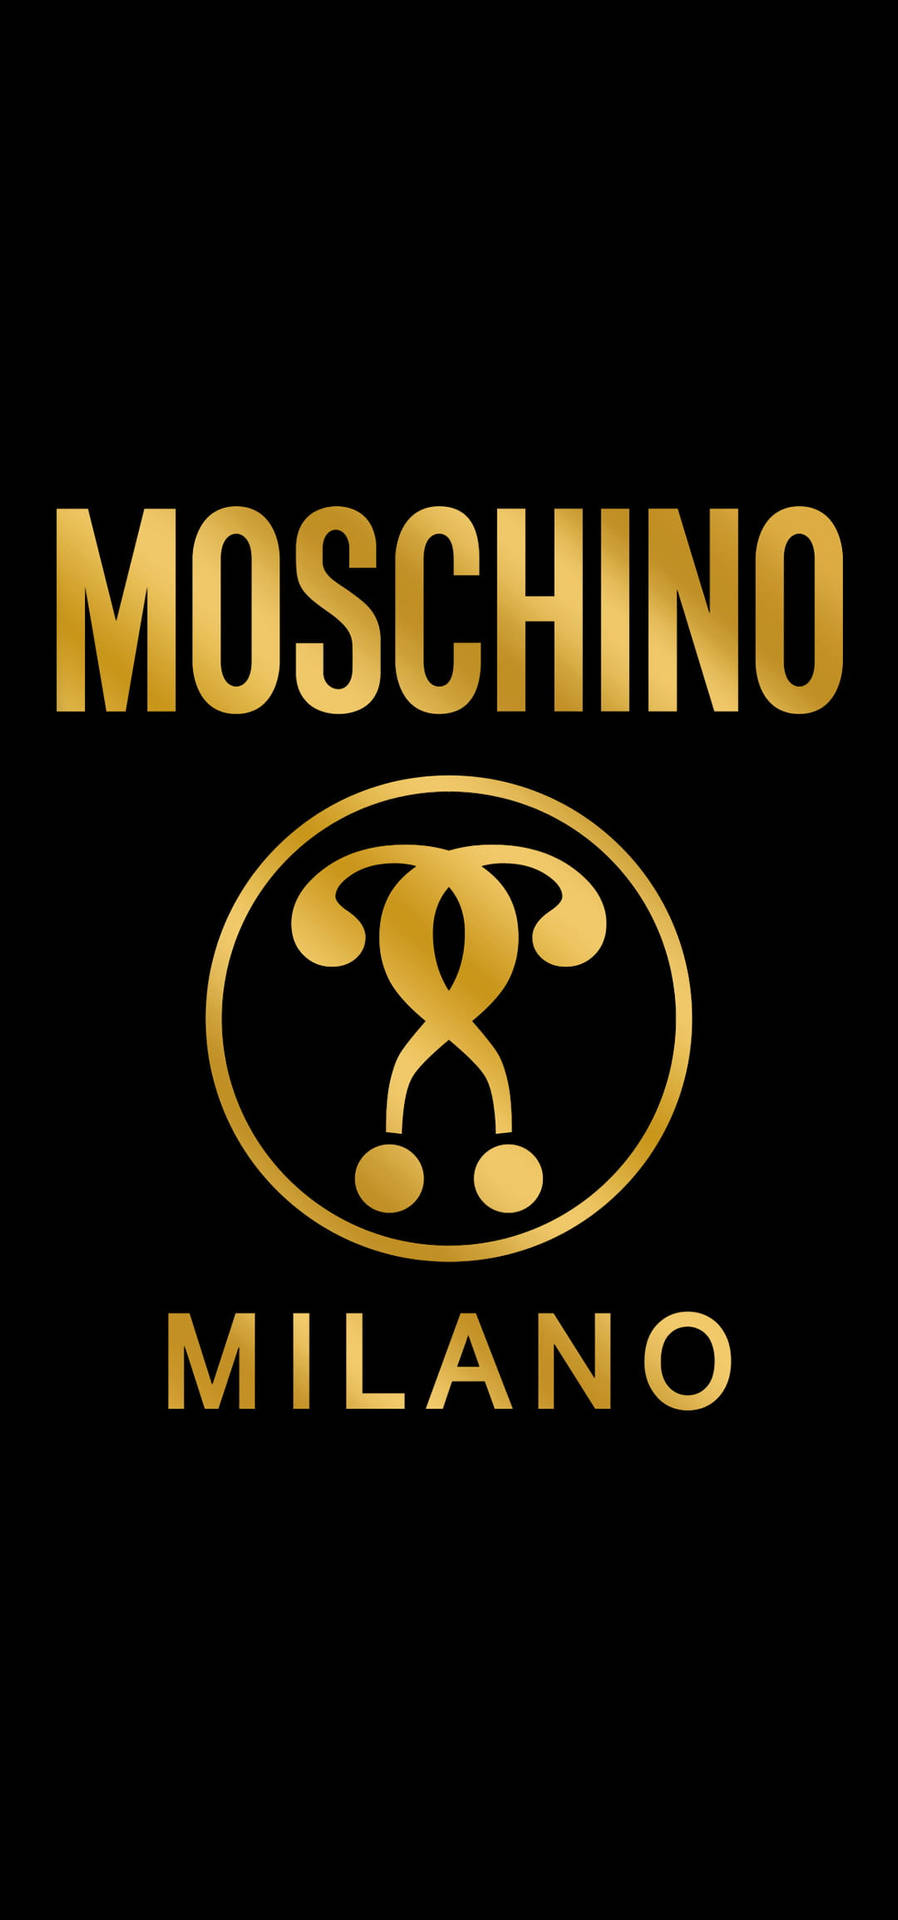 Download Black And Gold Moschino Wallpaper | Wallpapers.com